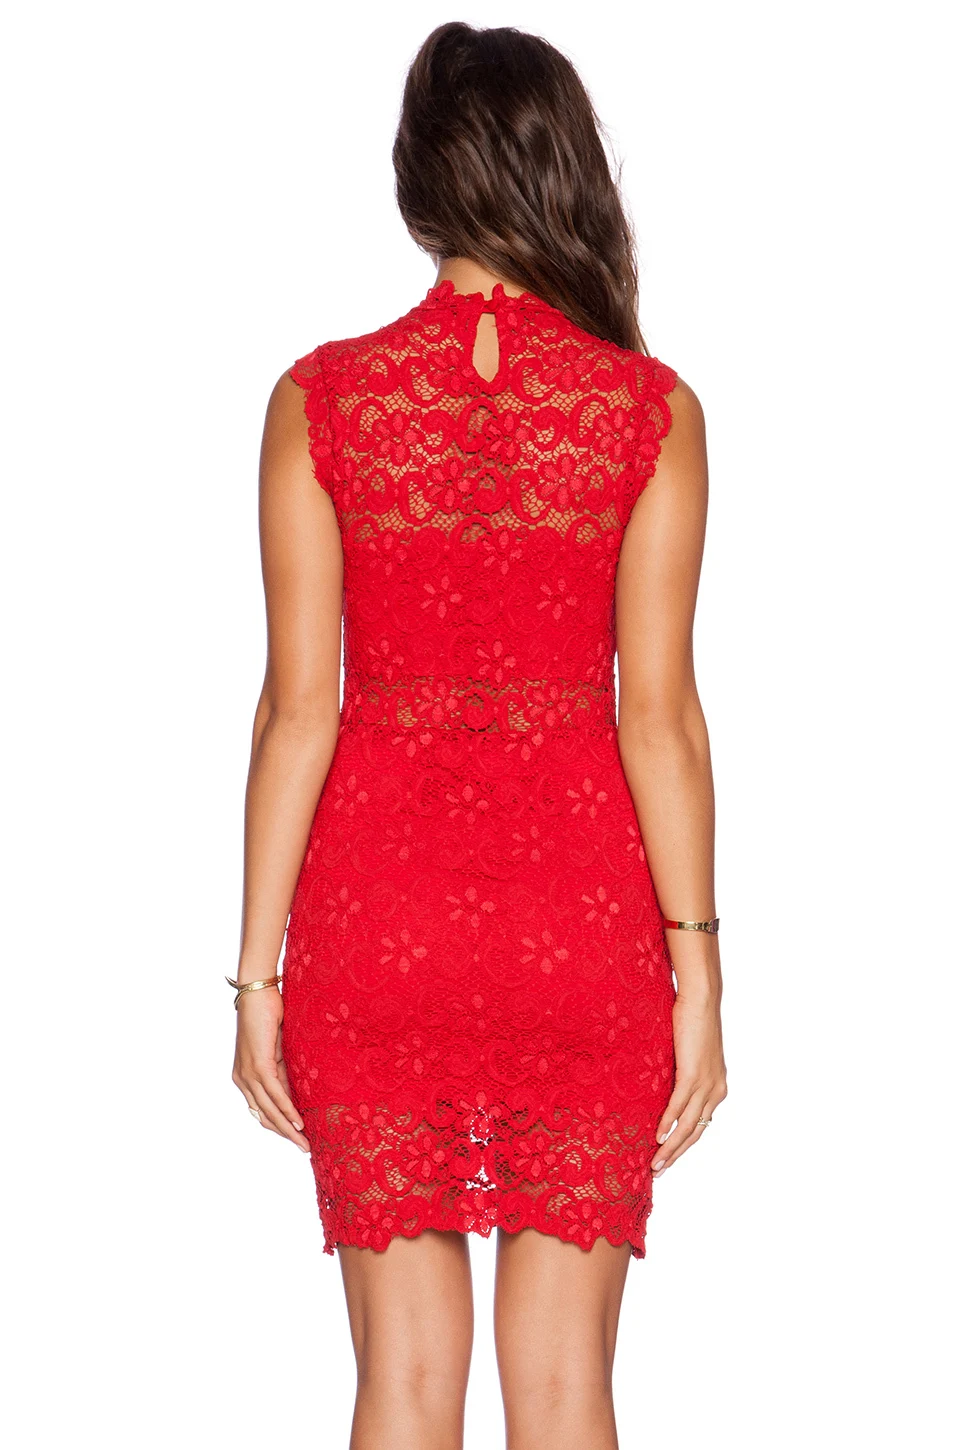 Women Red Short Tight Sexy Lace Cutout Mini Dress - Buy Red Dress,Red ...